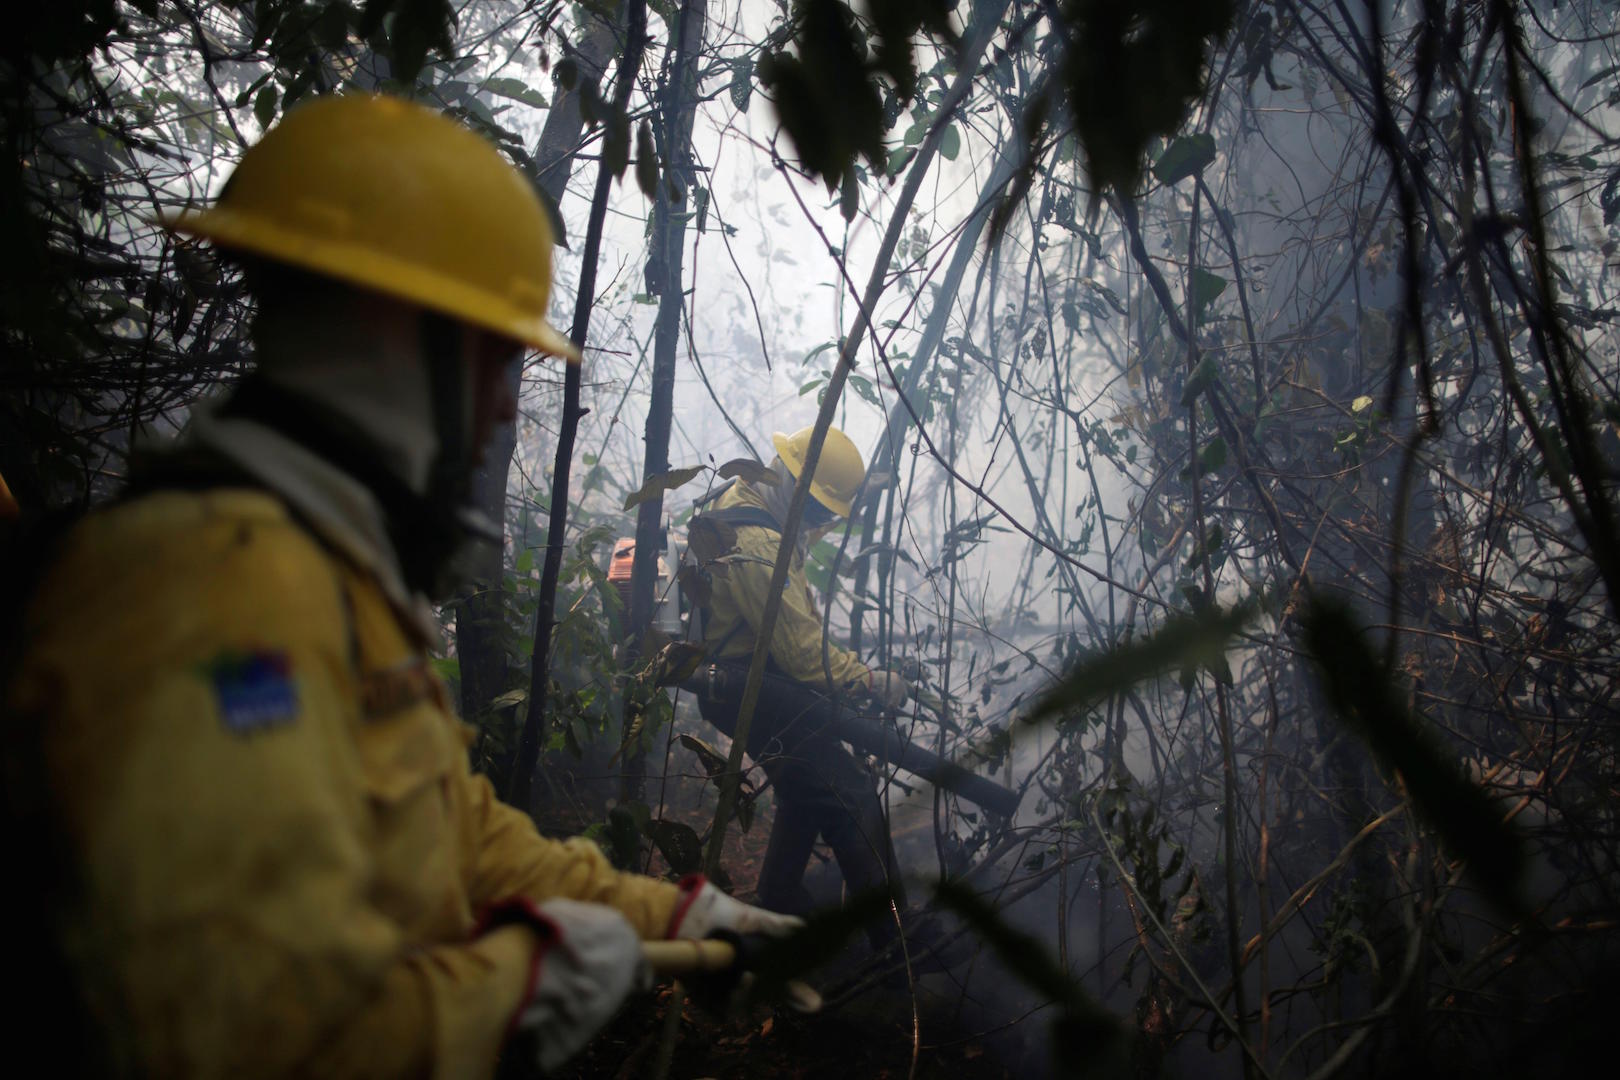 <p>Ibama firefighters tackle blazes in Apui, Amazonas state, in August (image: Alamy)</p>